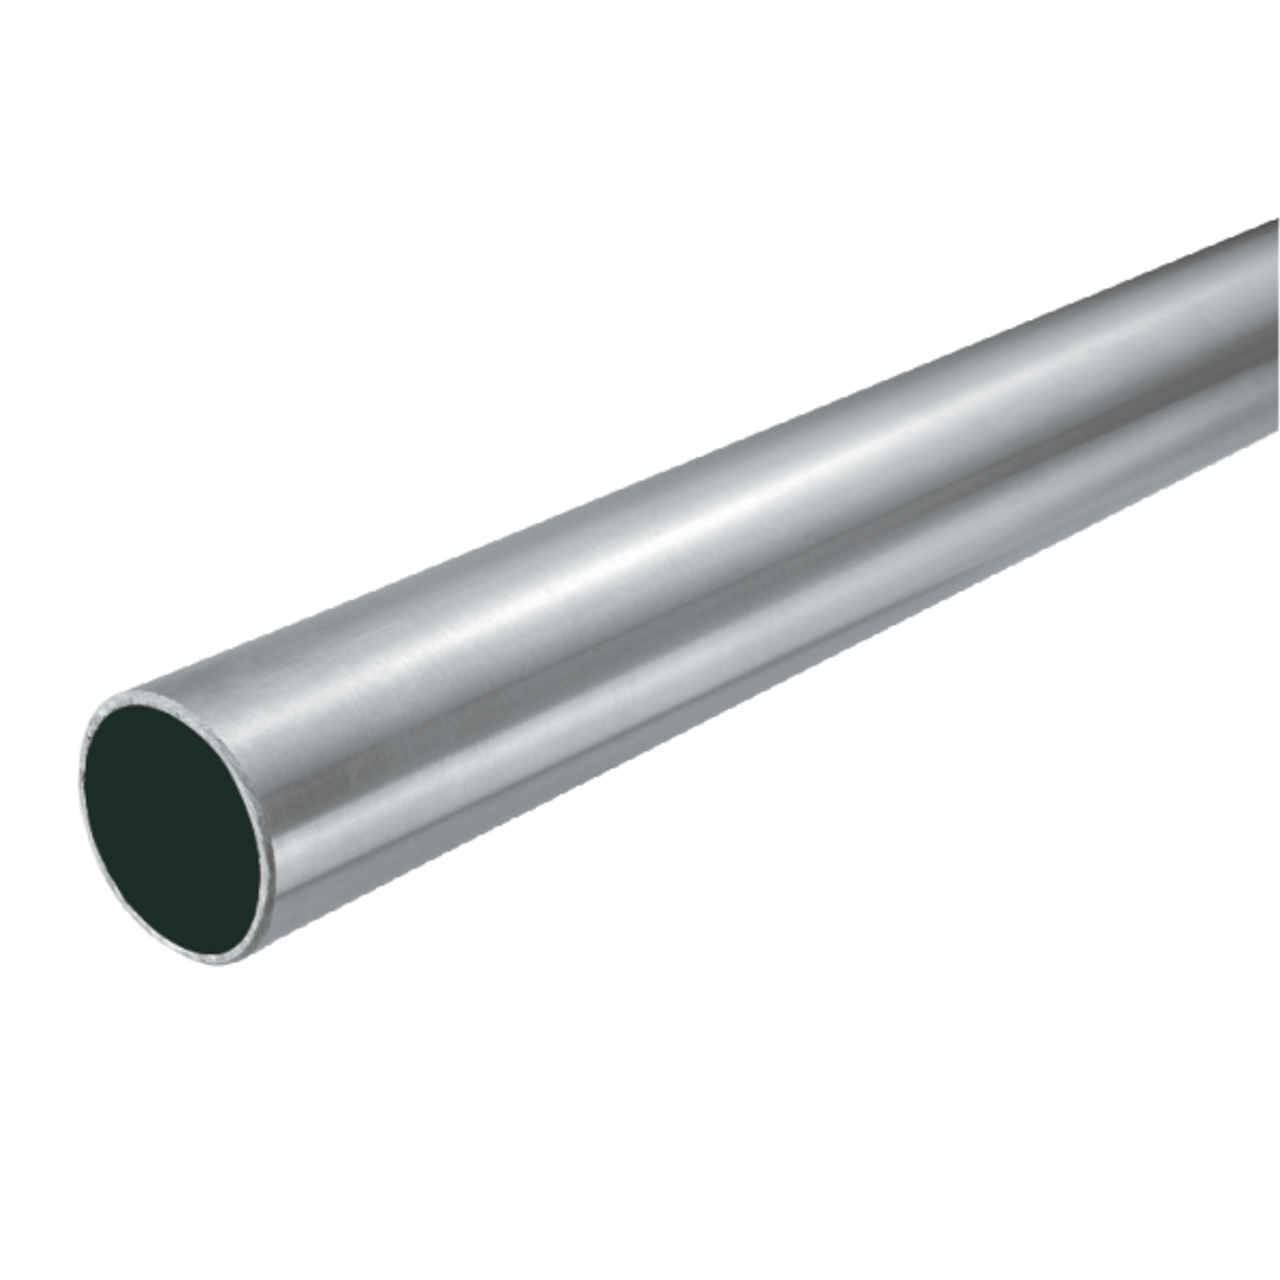 Tubular 1/2" Stainless Rod 9"10" (118 inches)